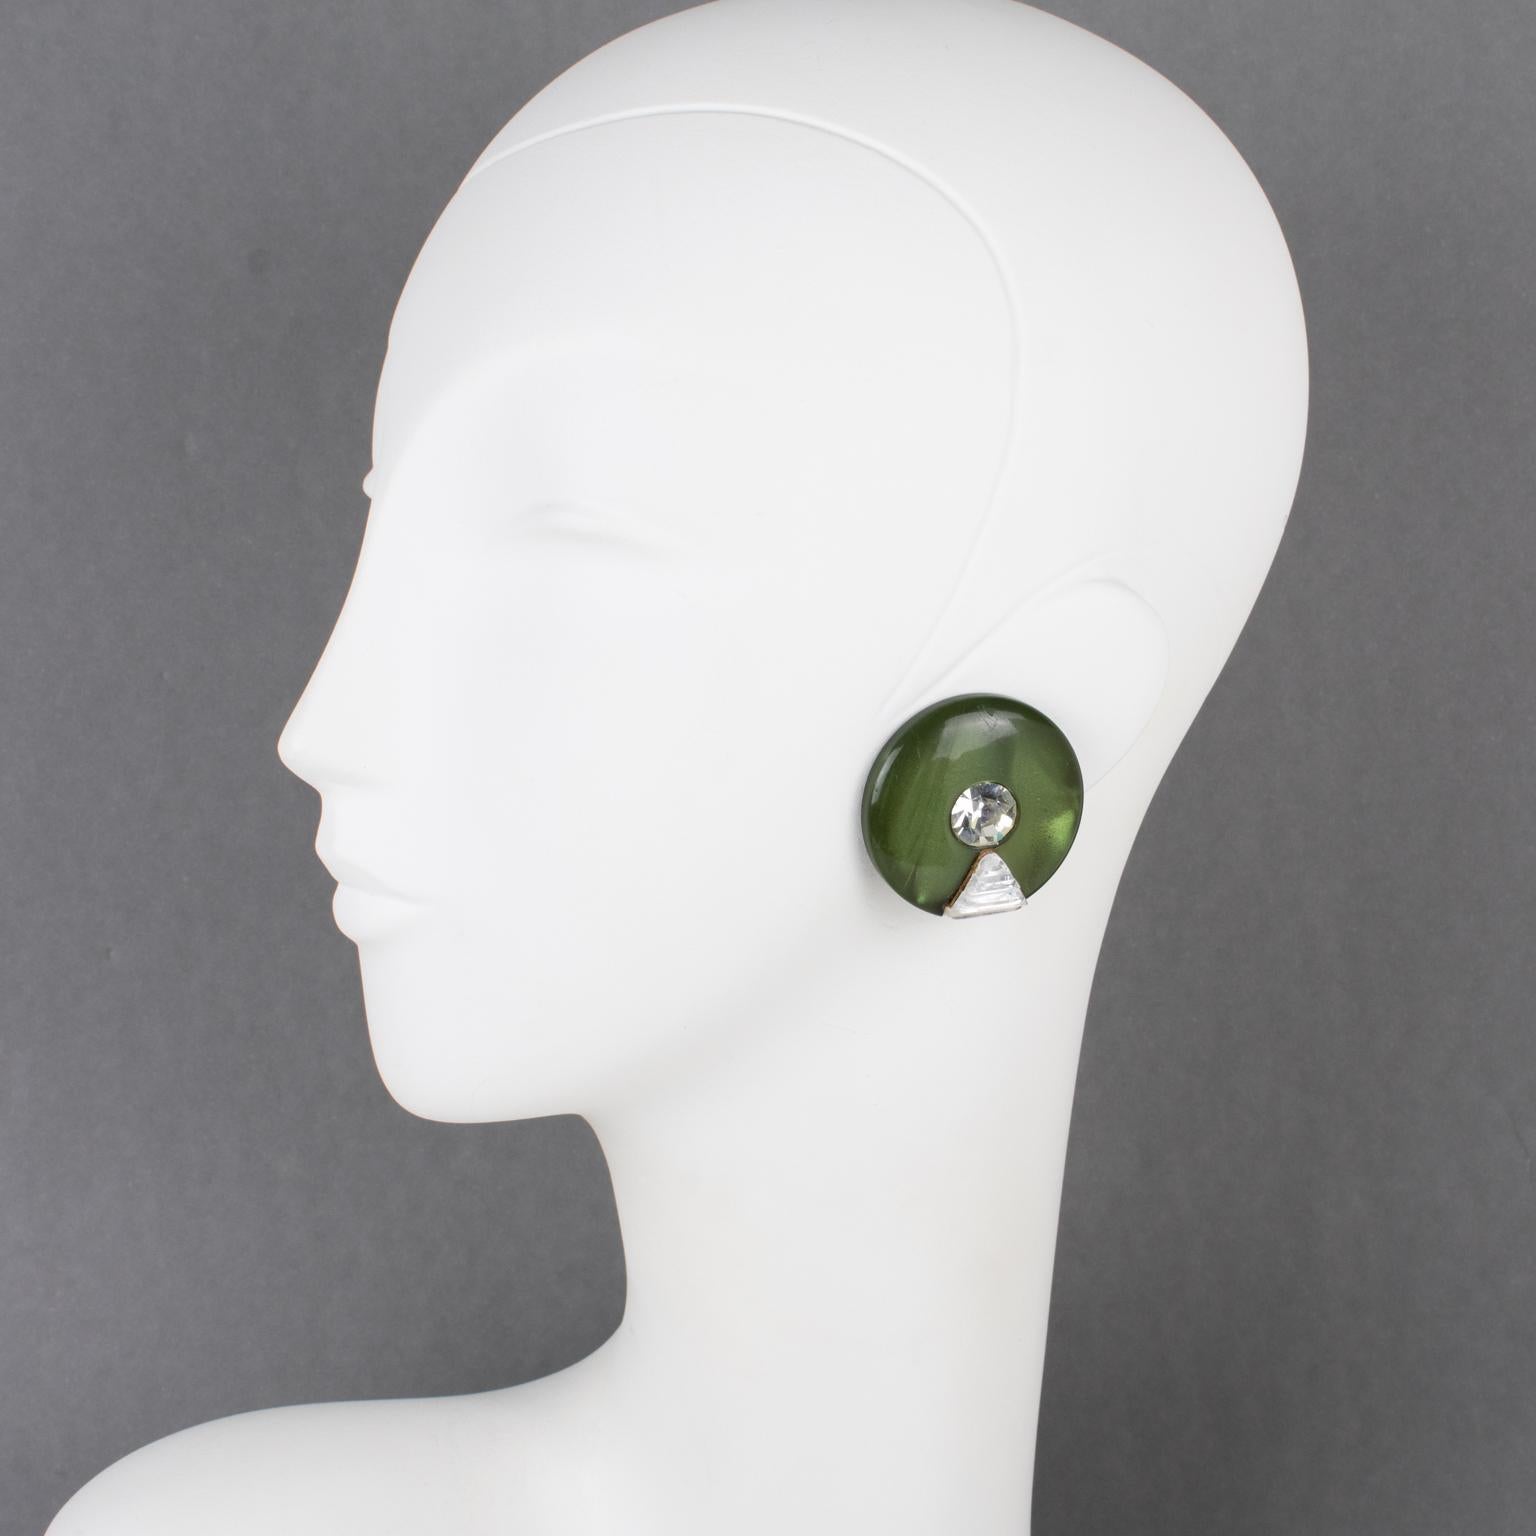 These lovely Pierre Cardin Space Age clip-on earrings were designed in the 1970s. 
The earrings feature a rounded domed shape in pearlized army green Lucite. The earrings have embellishments with clear crystal rhinestones. They are marked at the